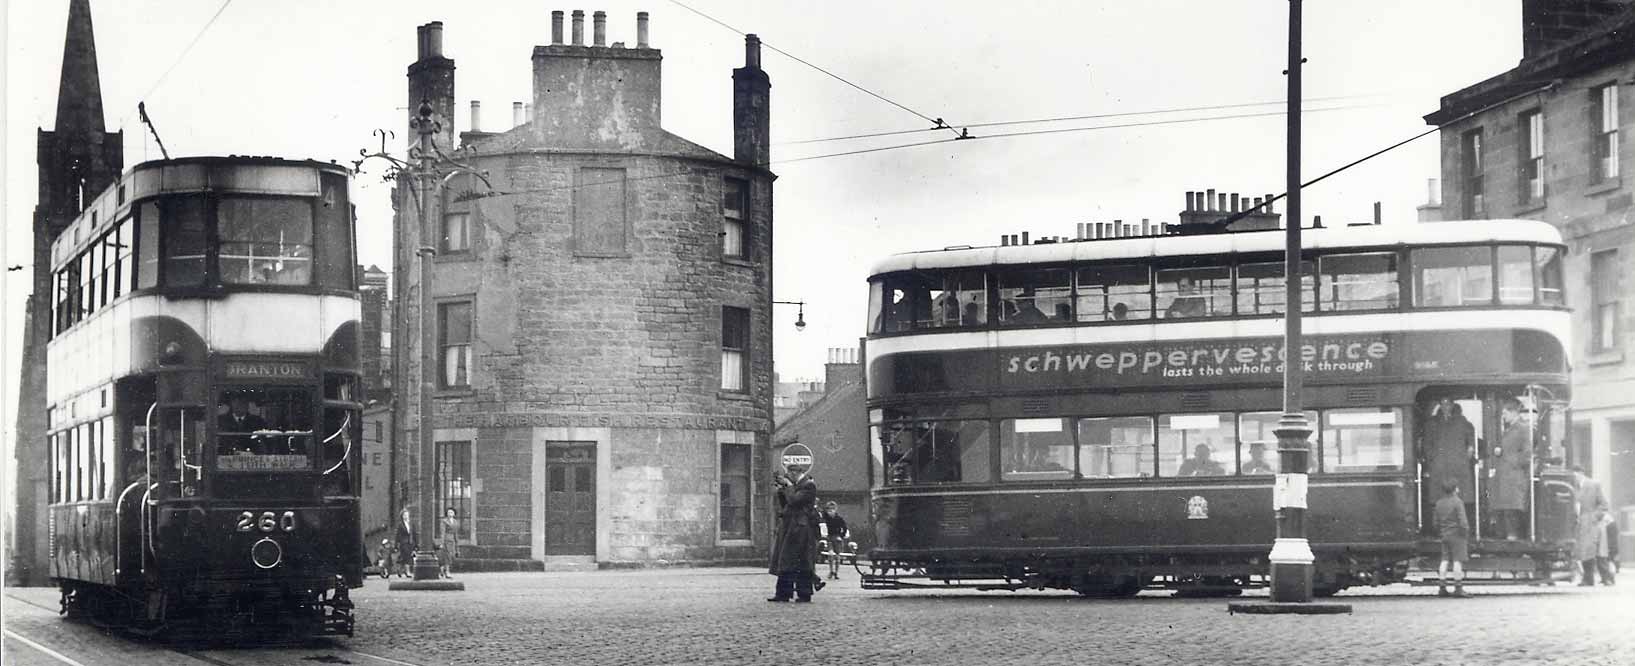 Zoom-in to  a view of Newhaen -  Two trams  -  1955